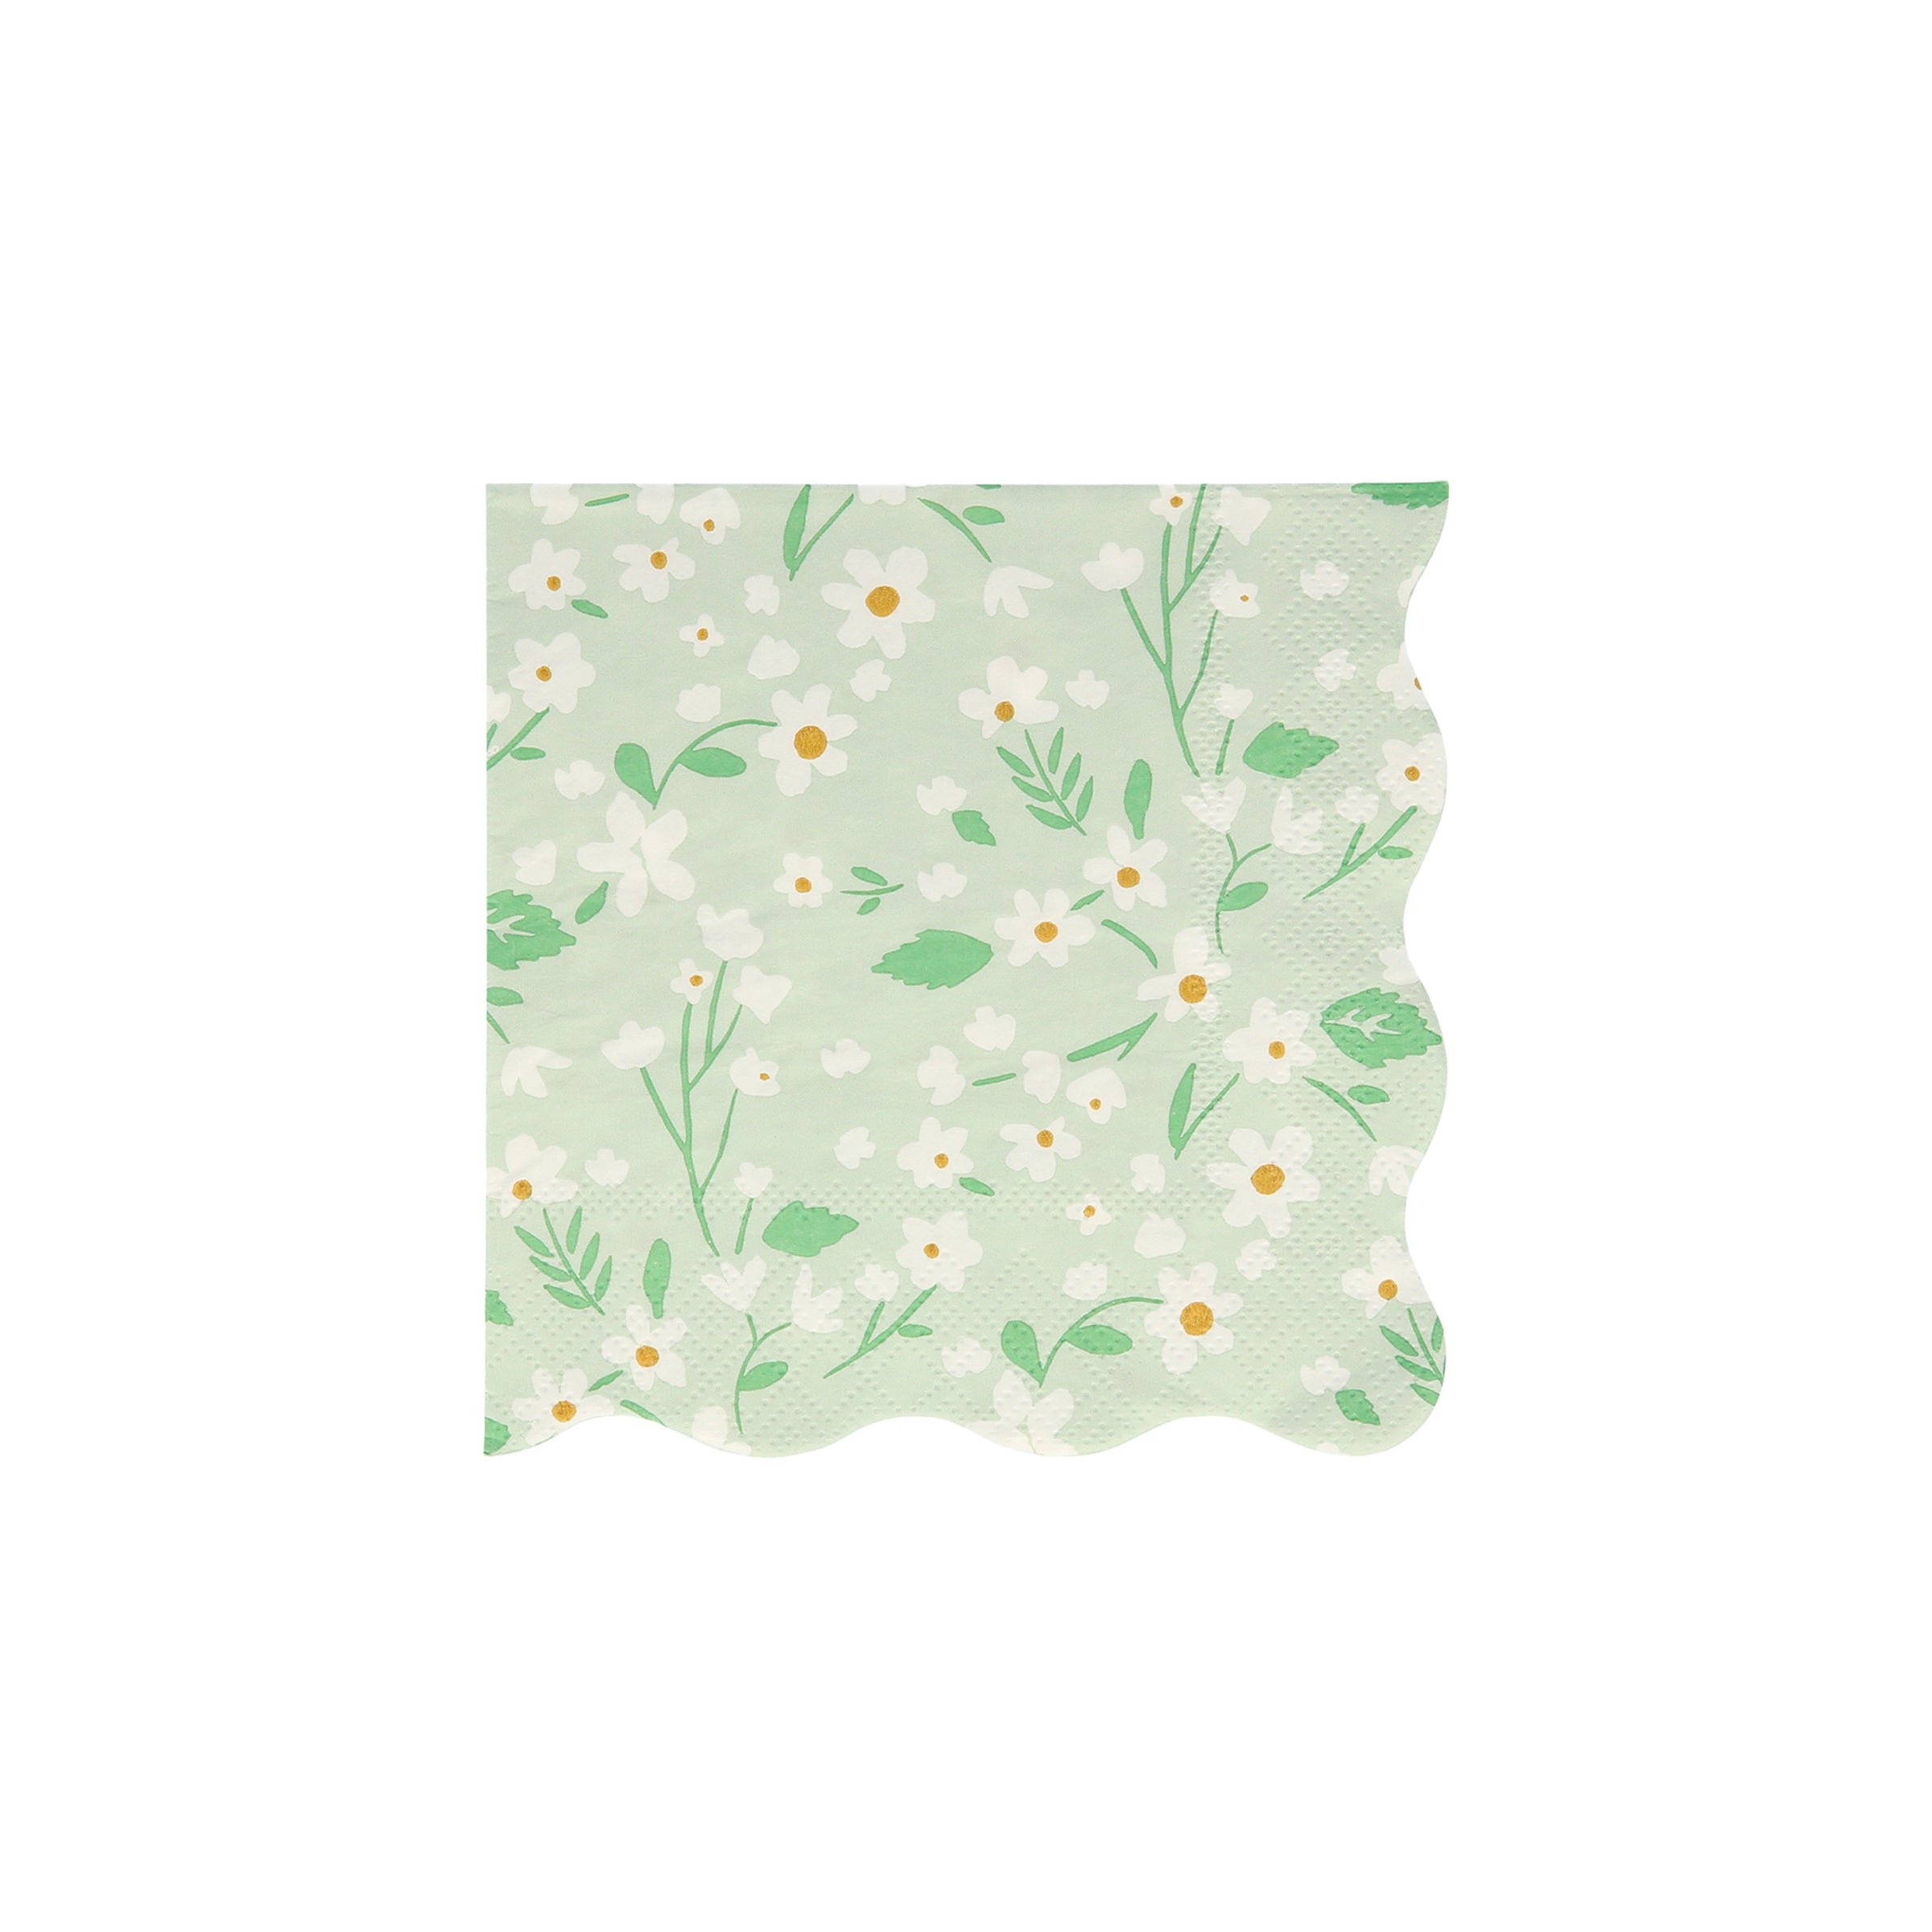 Our paper napkins have a pretty ditsy floral design, ideal as cocktail napkins, or for picnics or kids birthday parties.